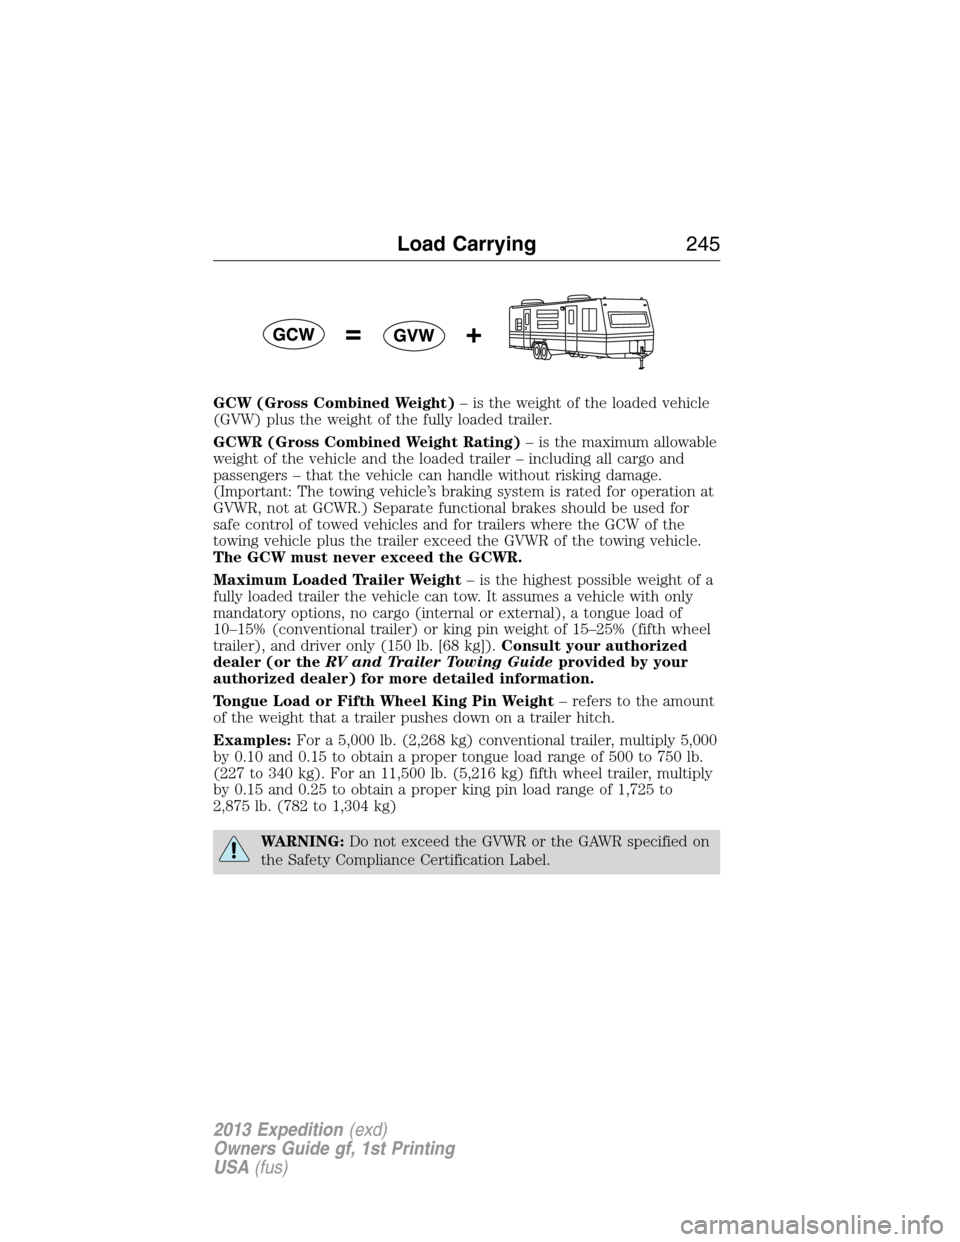 FORD EXPEDITION 2013 3.G Owners Manual GCW (Gross Combined Weight)– is the weight of the loaded vehicle
(GVW) plus the weight of the fully loaded trailer.
GCWR (Gross Combined Weight Rating)– is the maximum allowable
weight of the vehi